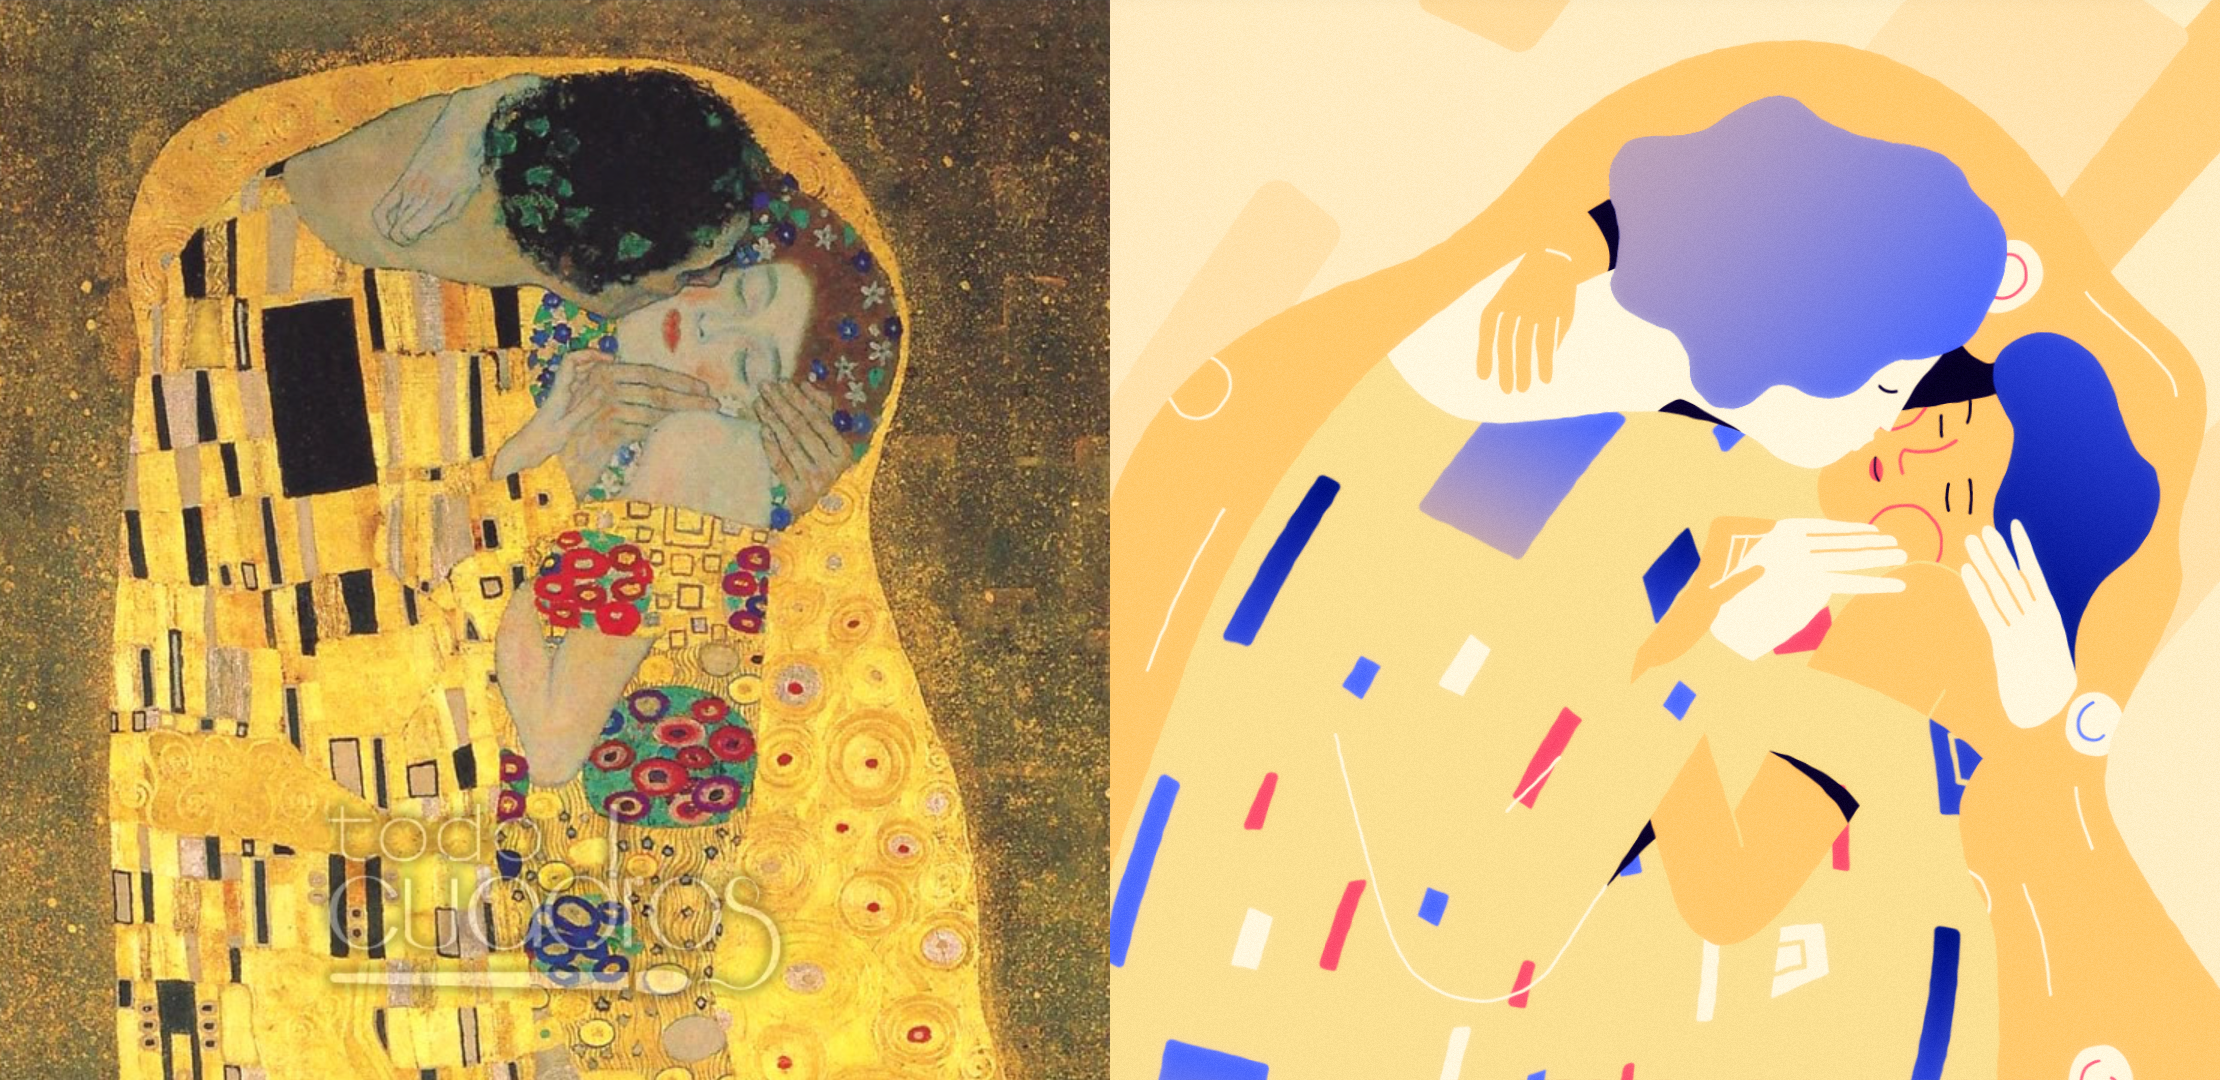 The Kiss by Klimt original and illustration